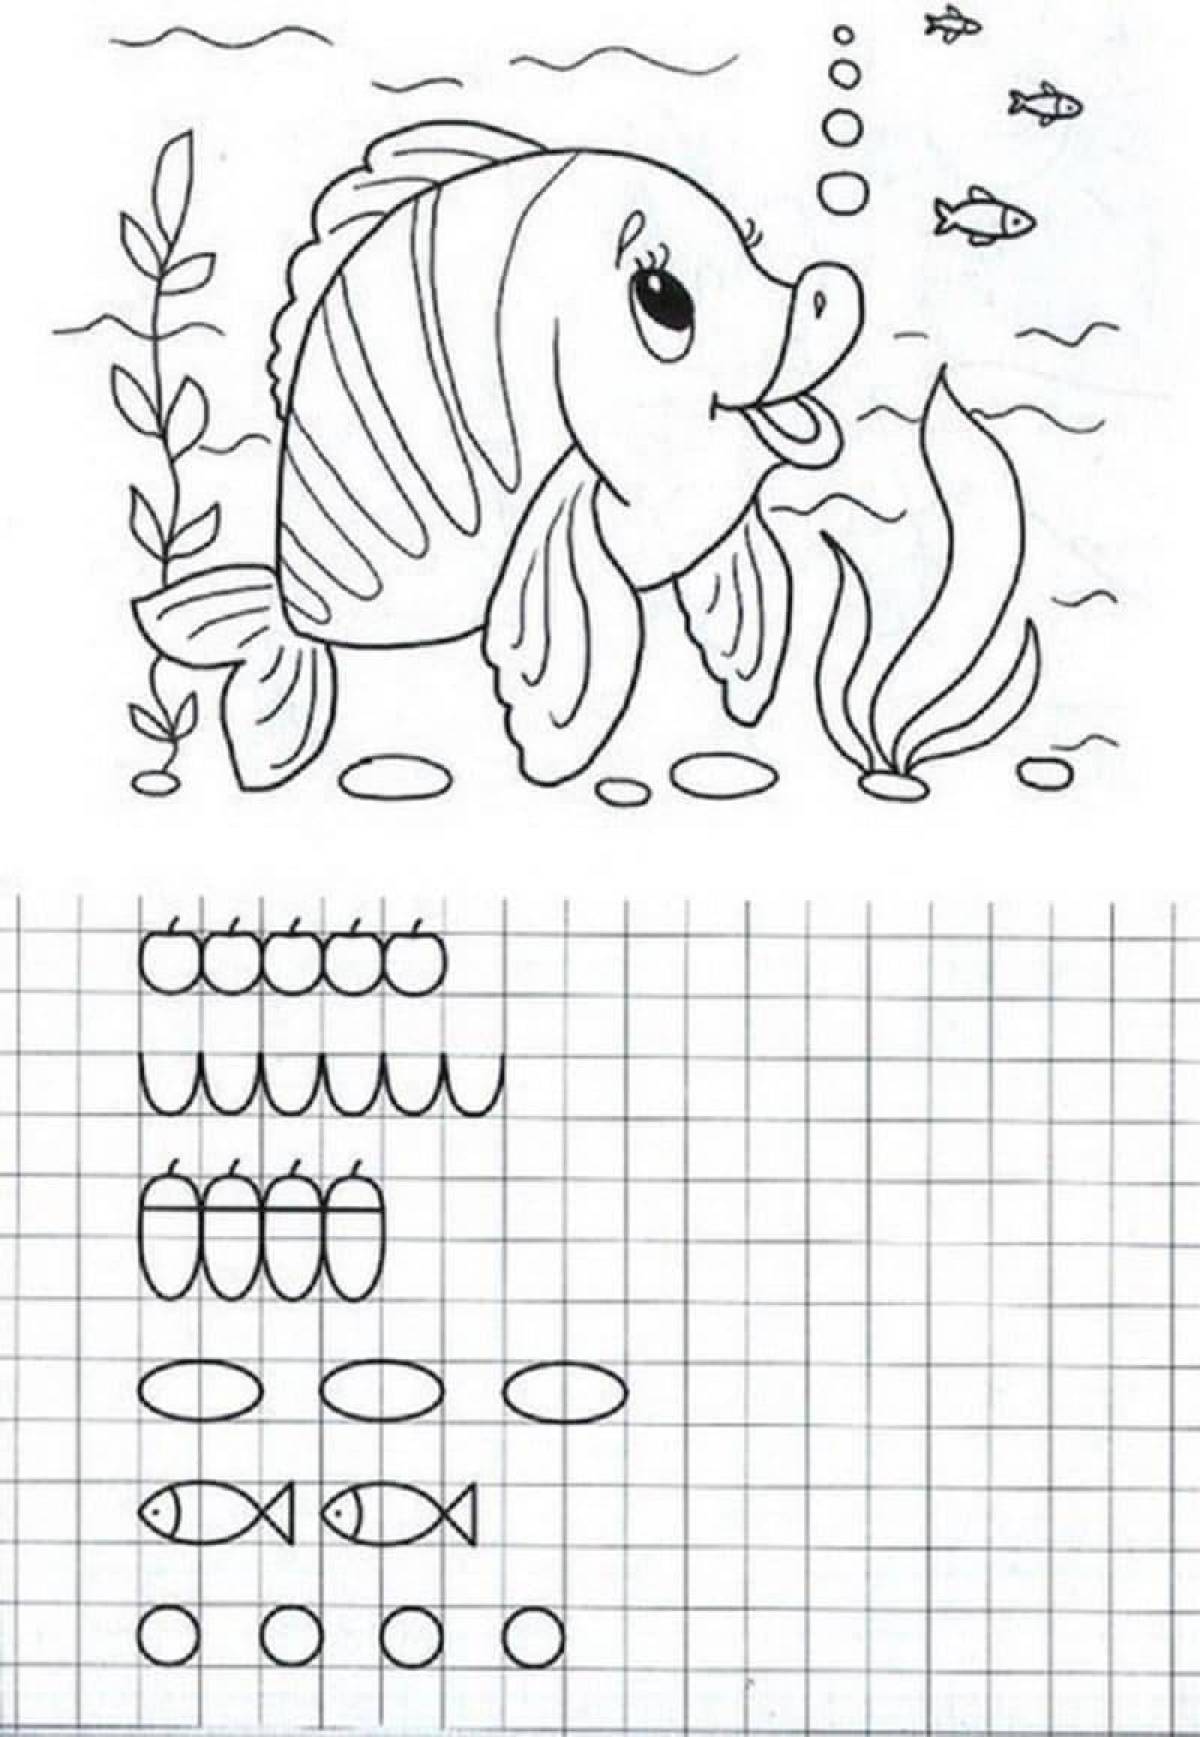 Difficult coloring with fun tasks for kids 6-7 years old